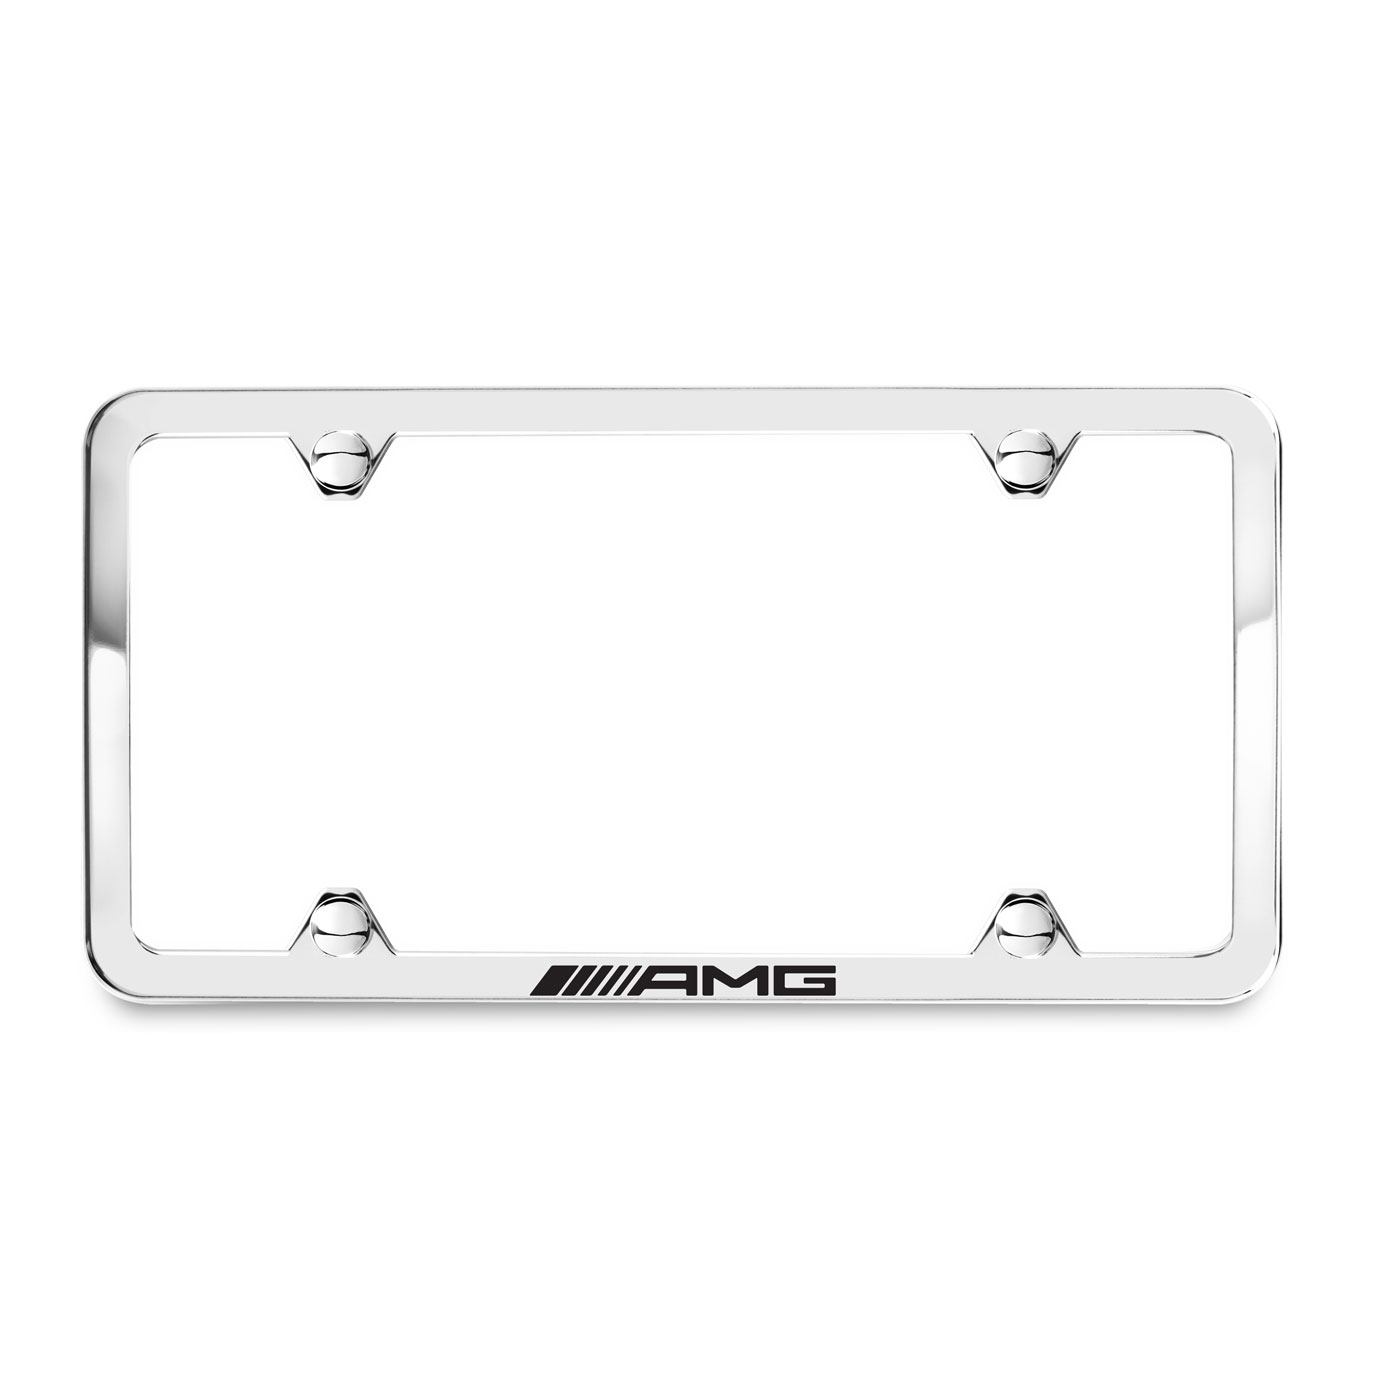 Fit Mercedes Benz Stainless Steel Chrome License Plate Frame Laser Engraved